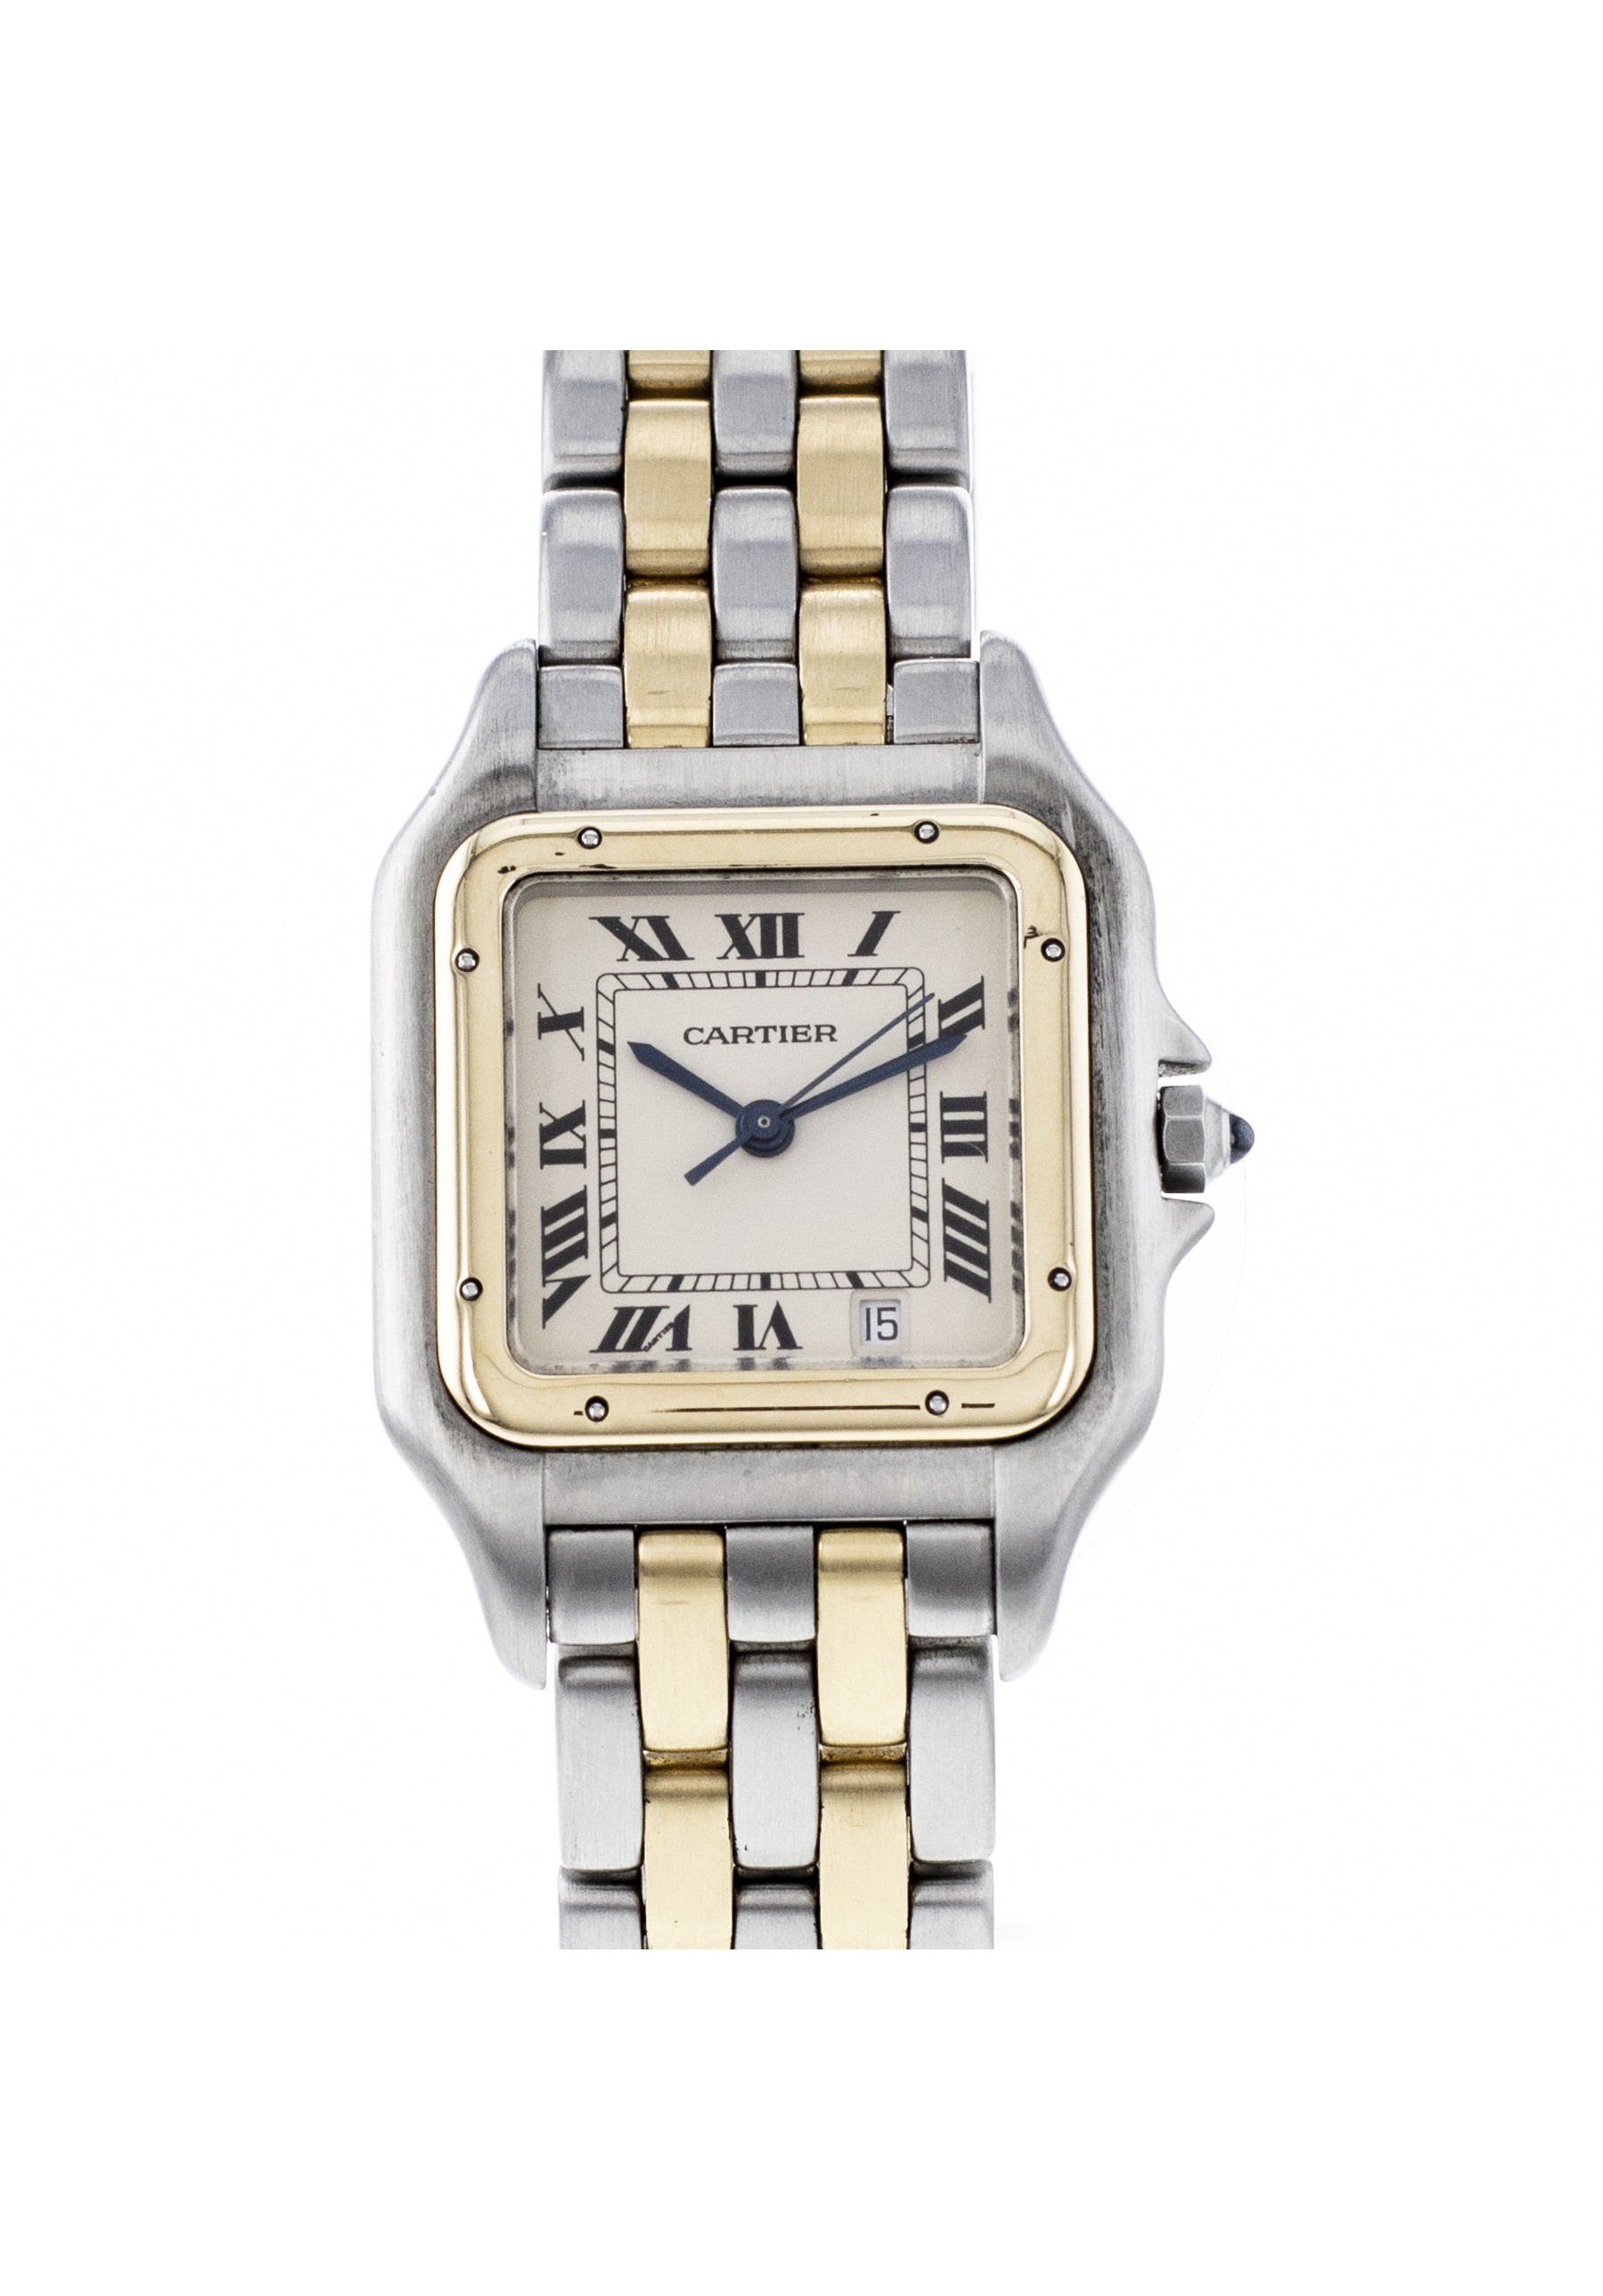 Pre-owned CARTIER Panthère watch : Ref 